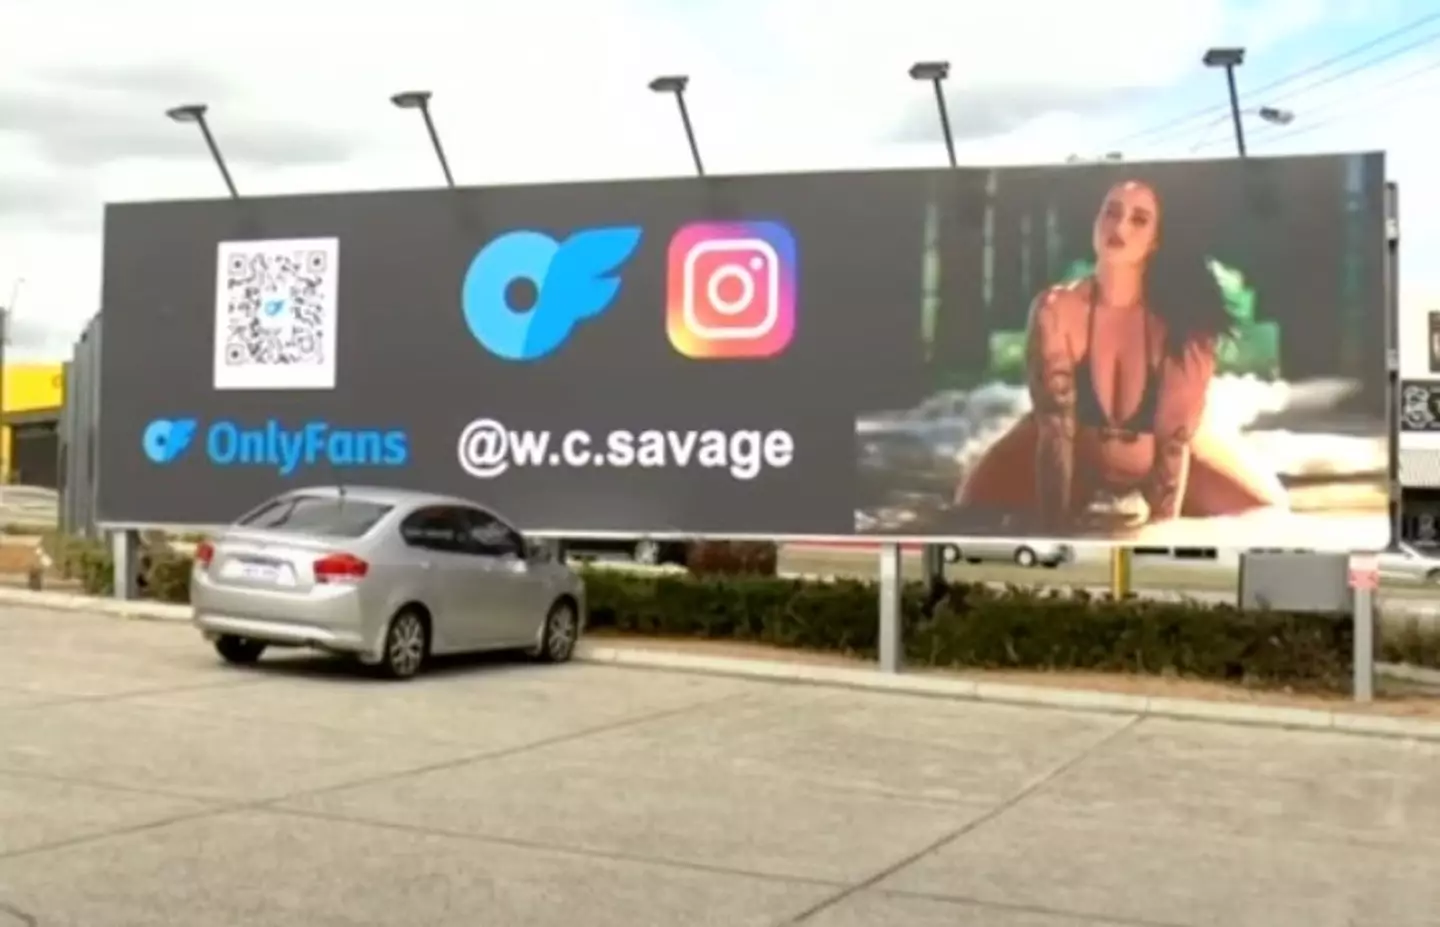 The OnlyFans star is believed to be the first person in Australia to advertise her page on a billboard.